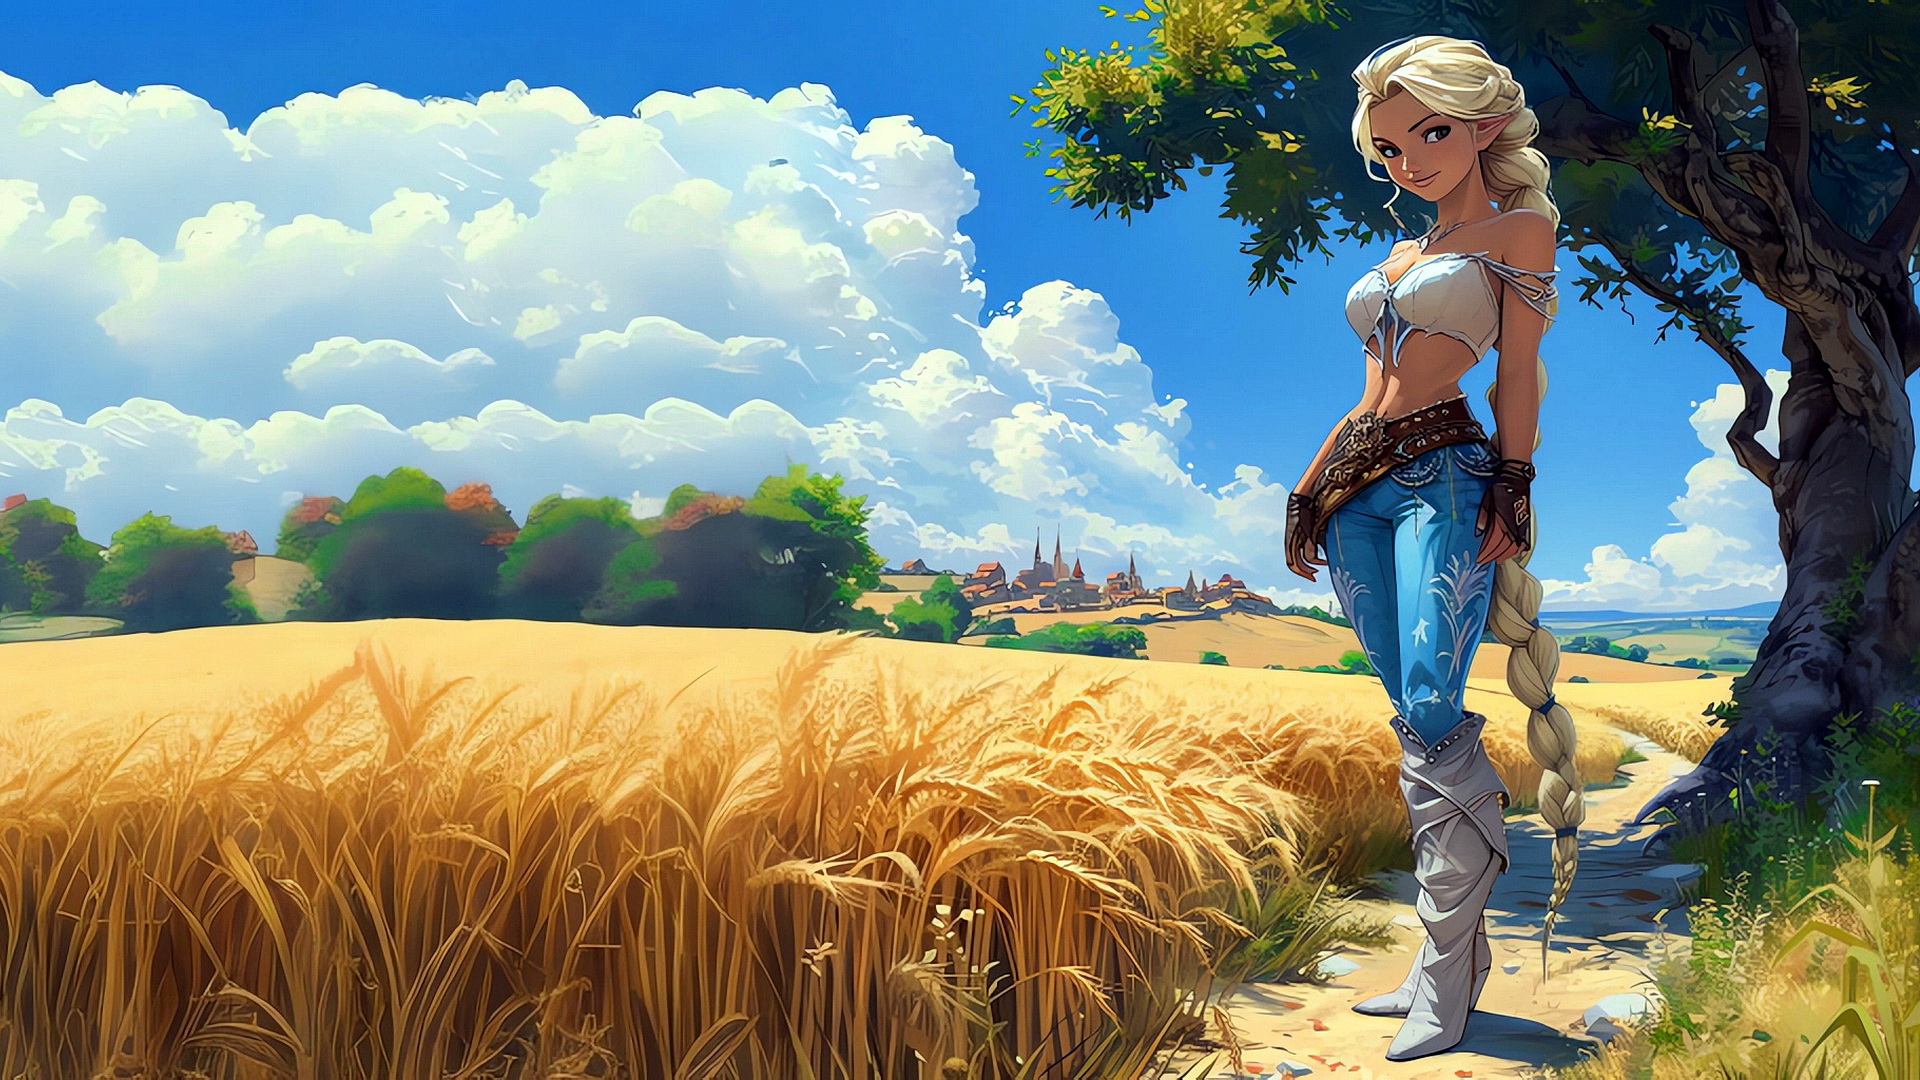 The elf girl is standing in a field